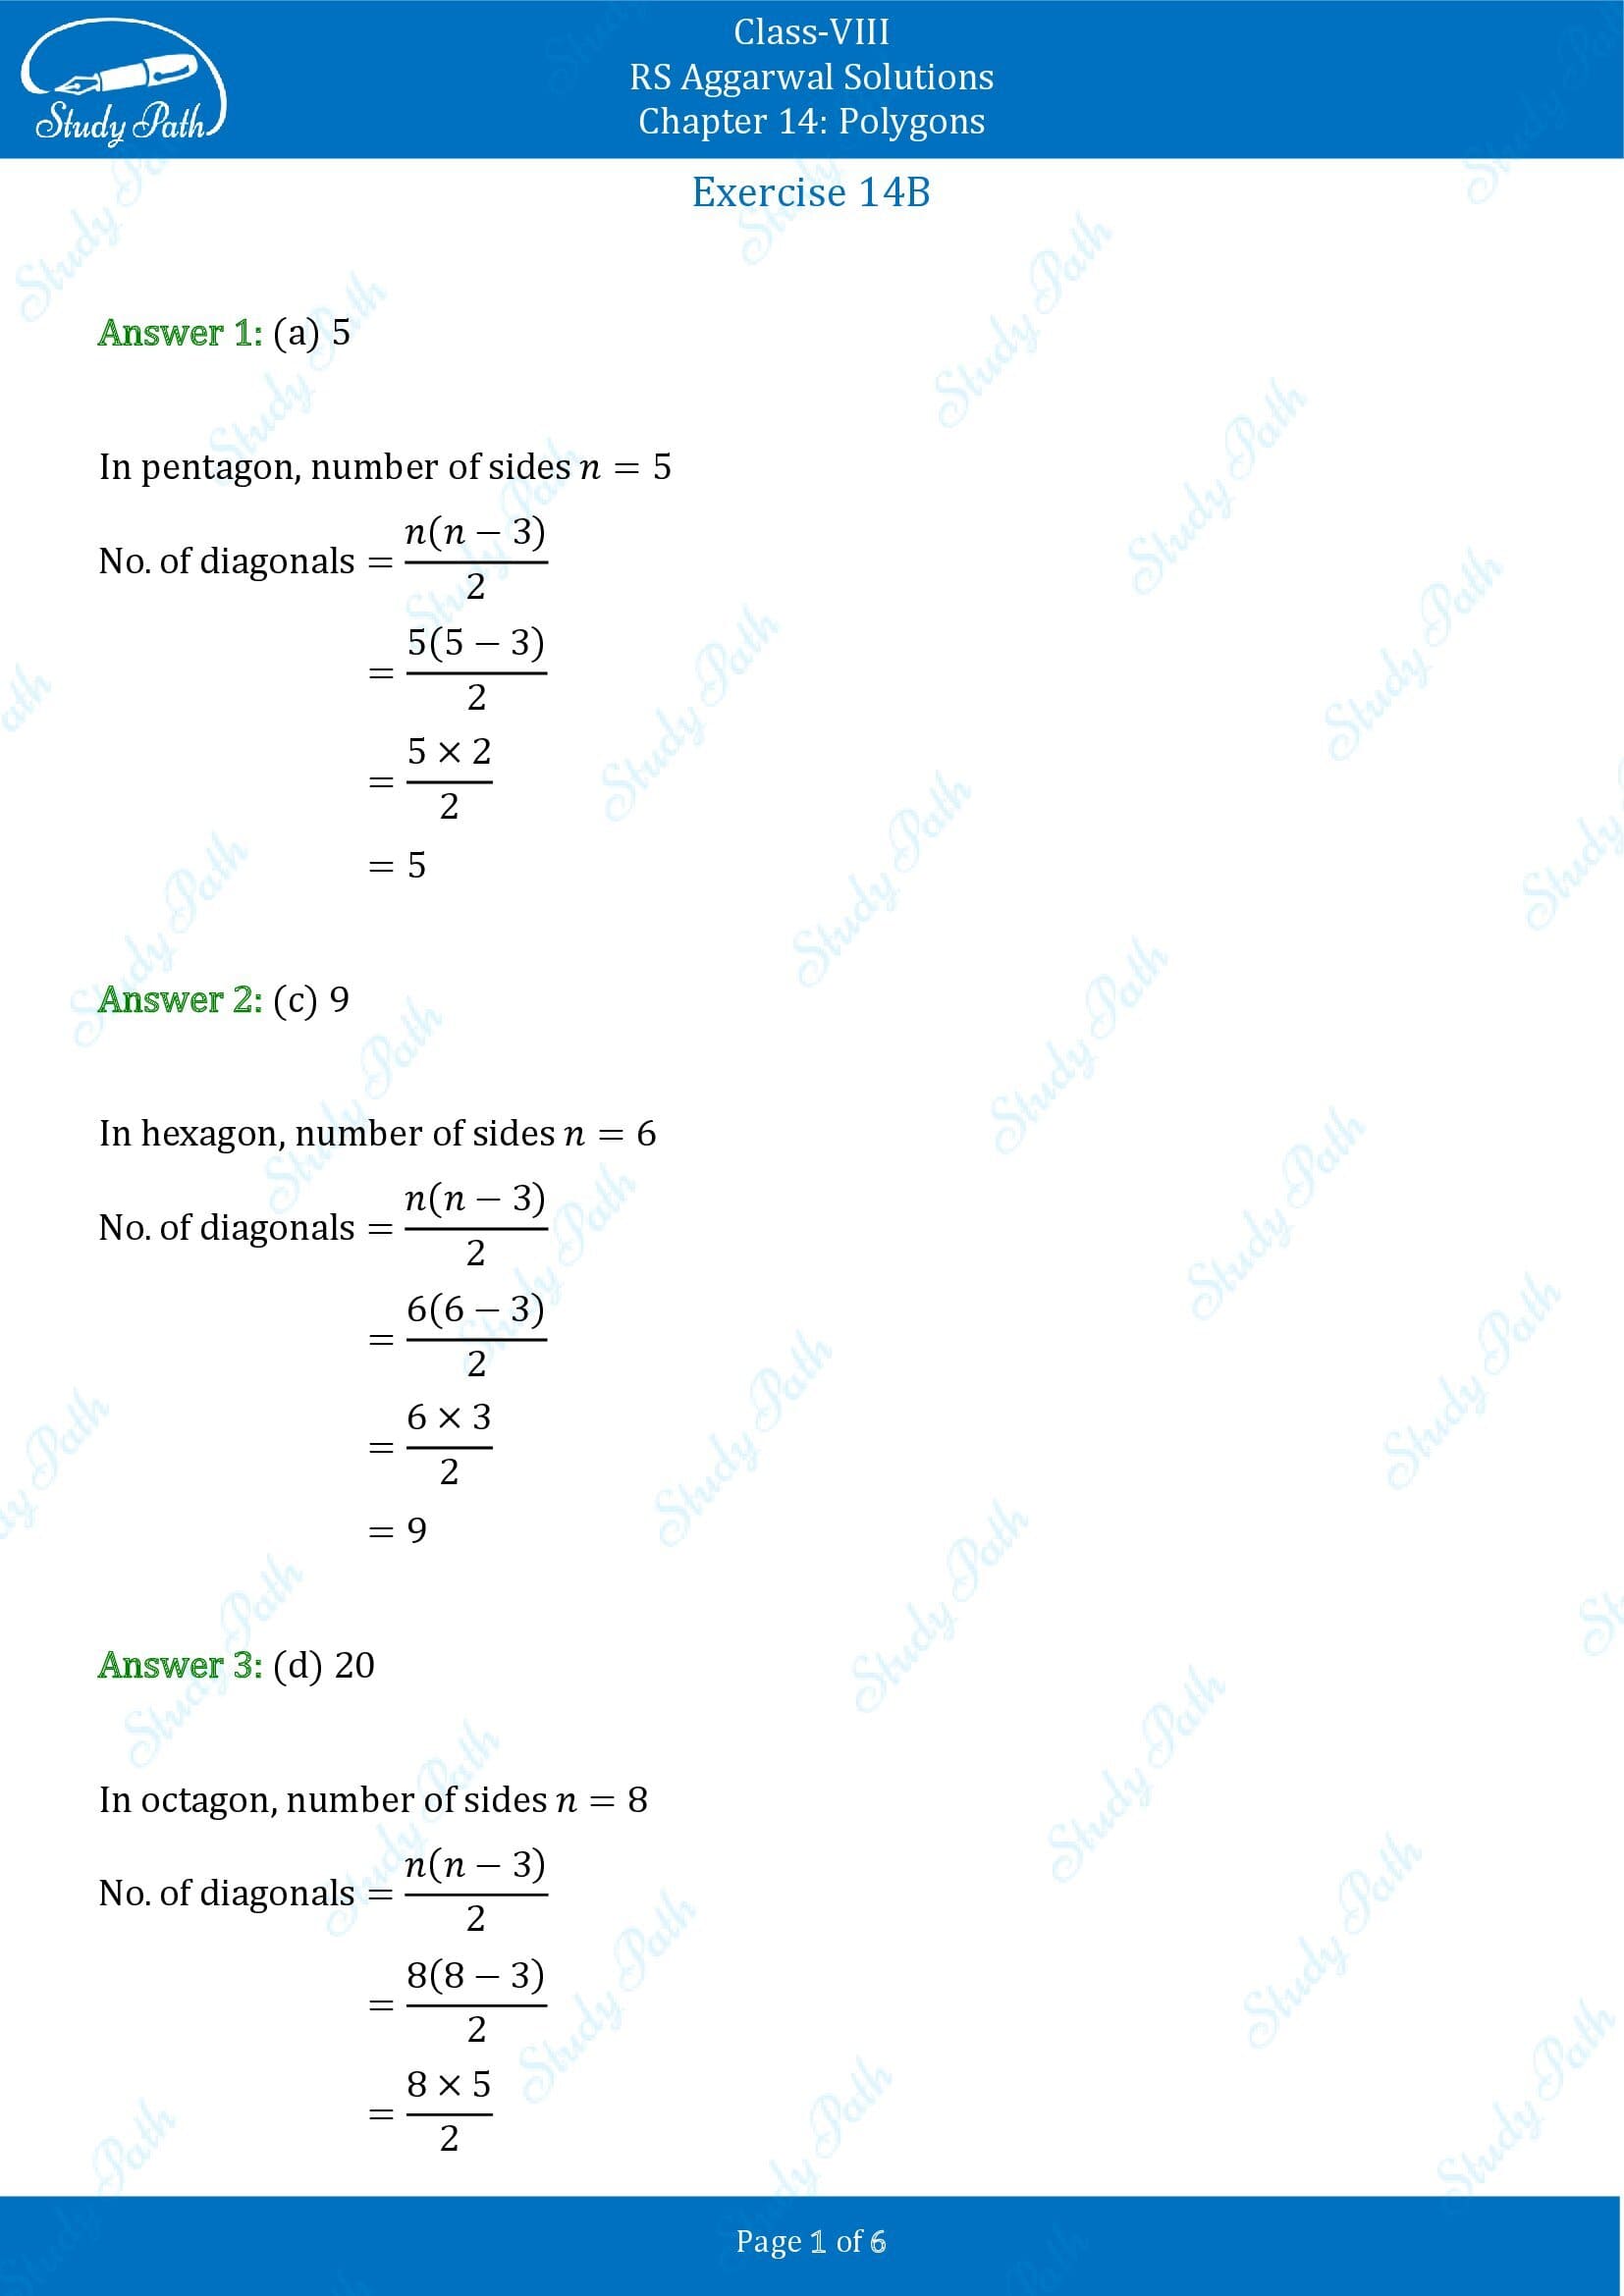 RS Aggarwal Solutions Class 8 Chapter 14 Polygons Exercise 14B MCQs 00001